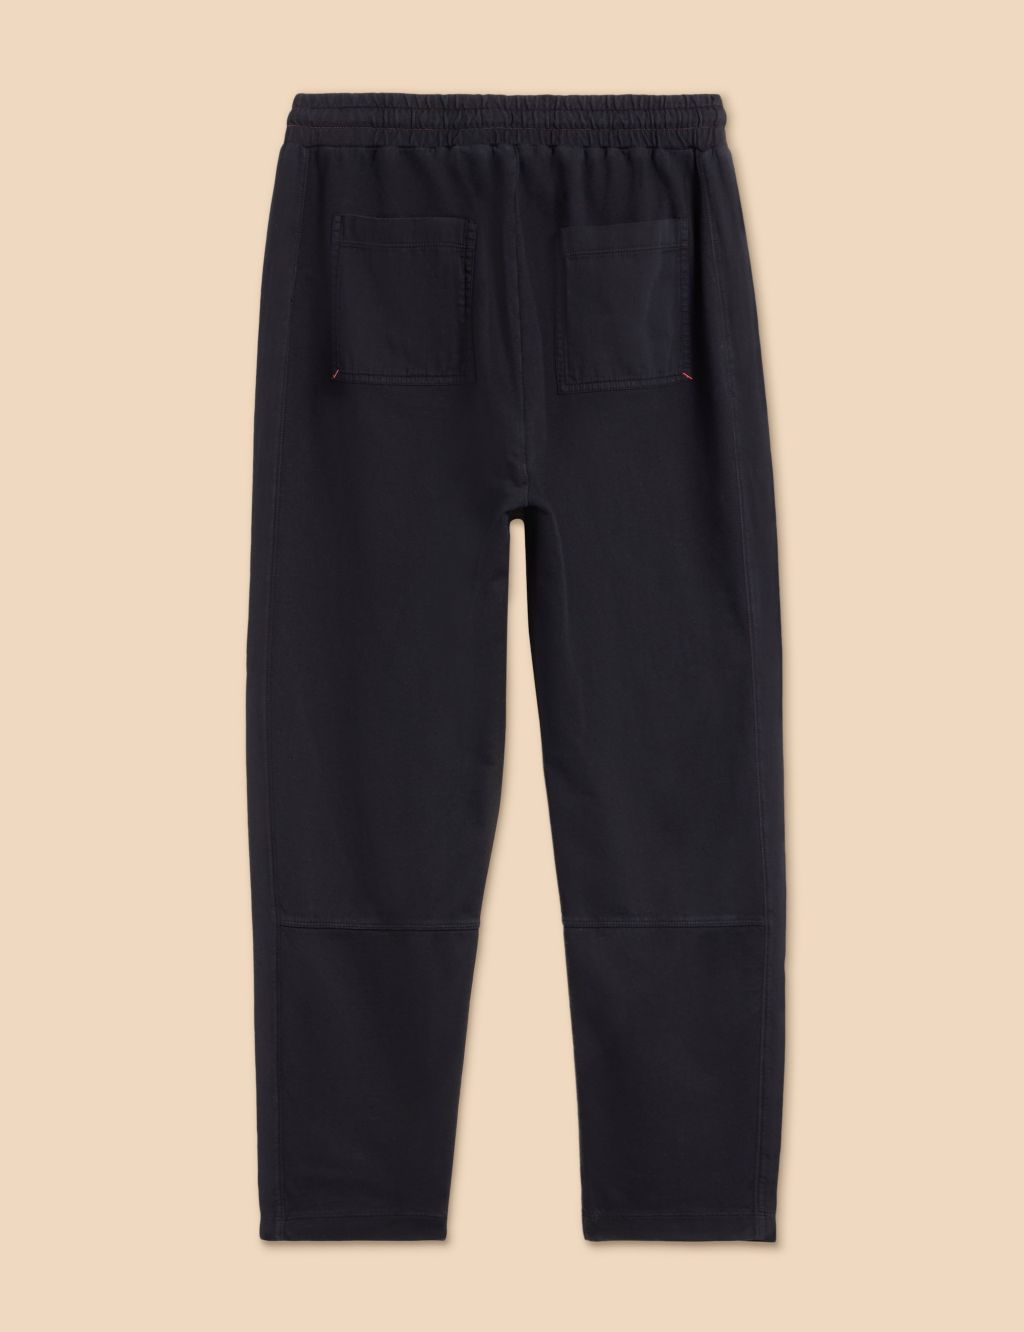 Jersey Slim Fit Joggers image 6